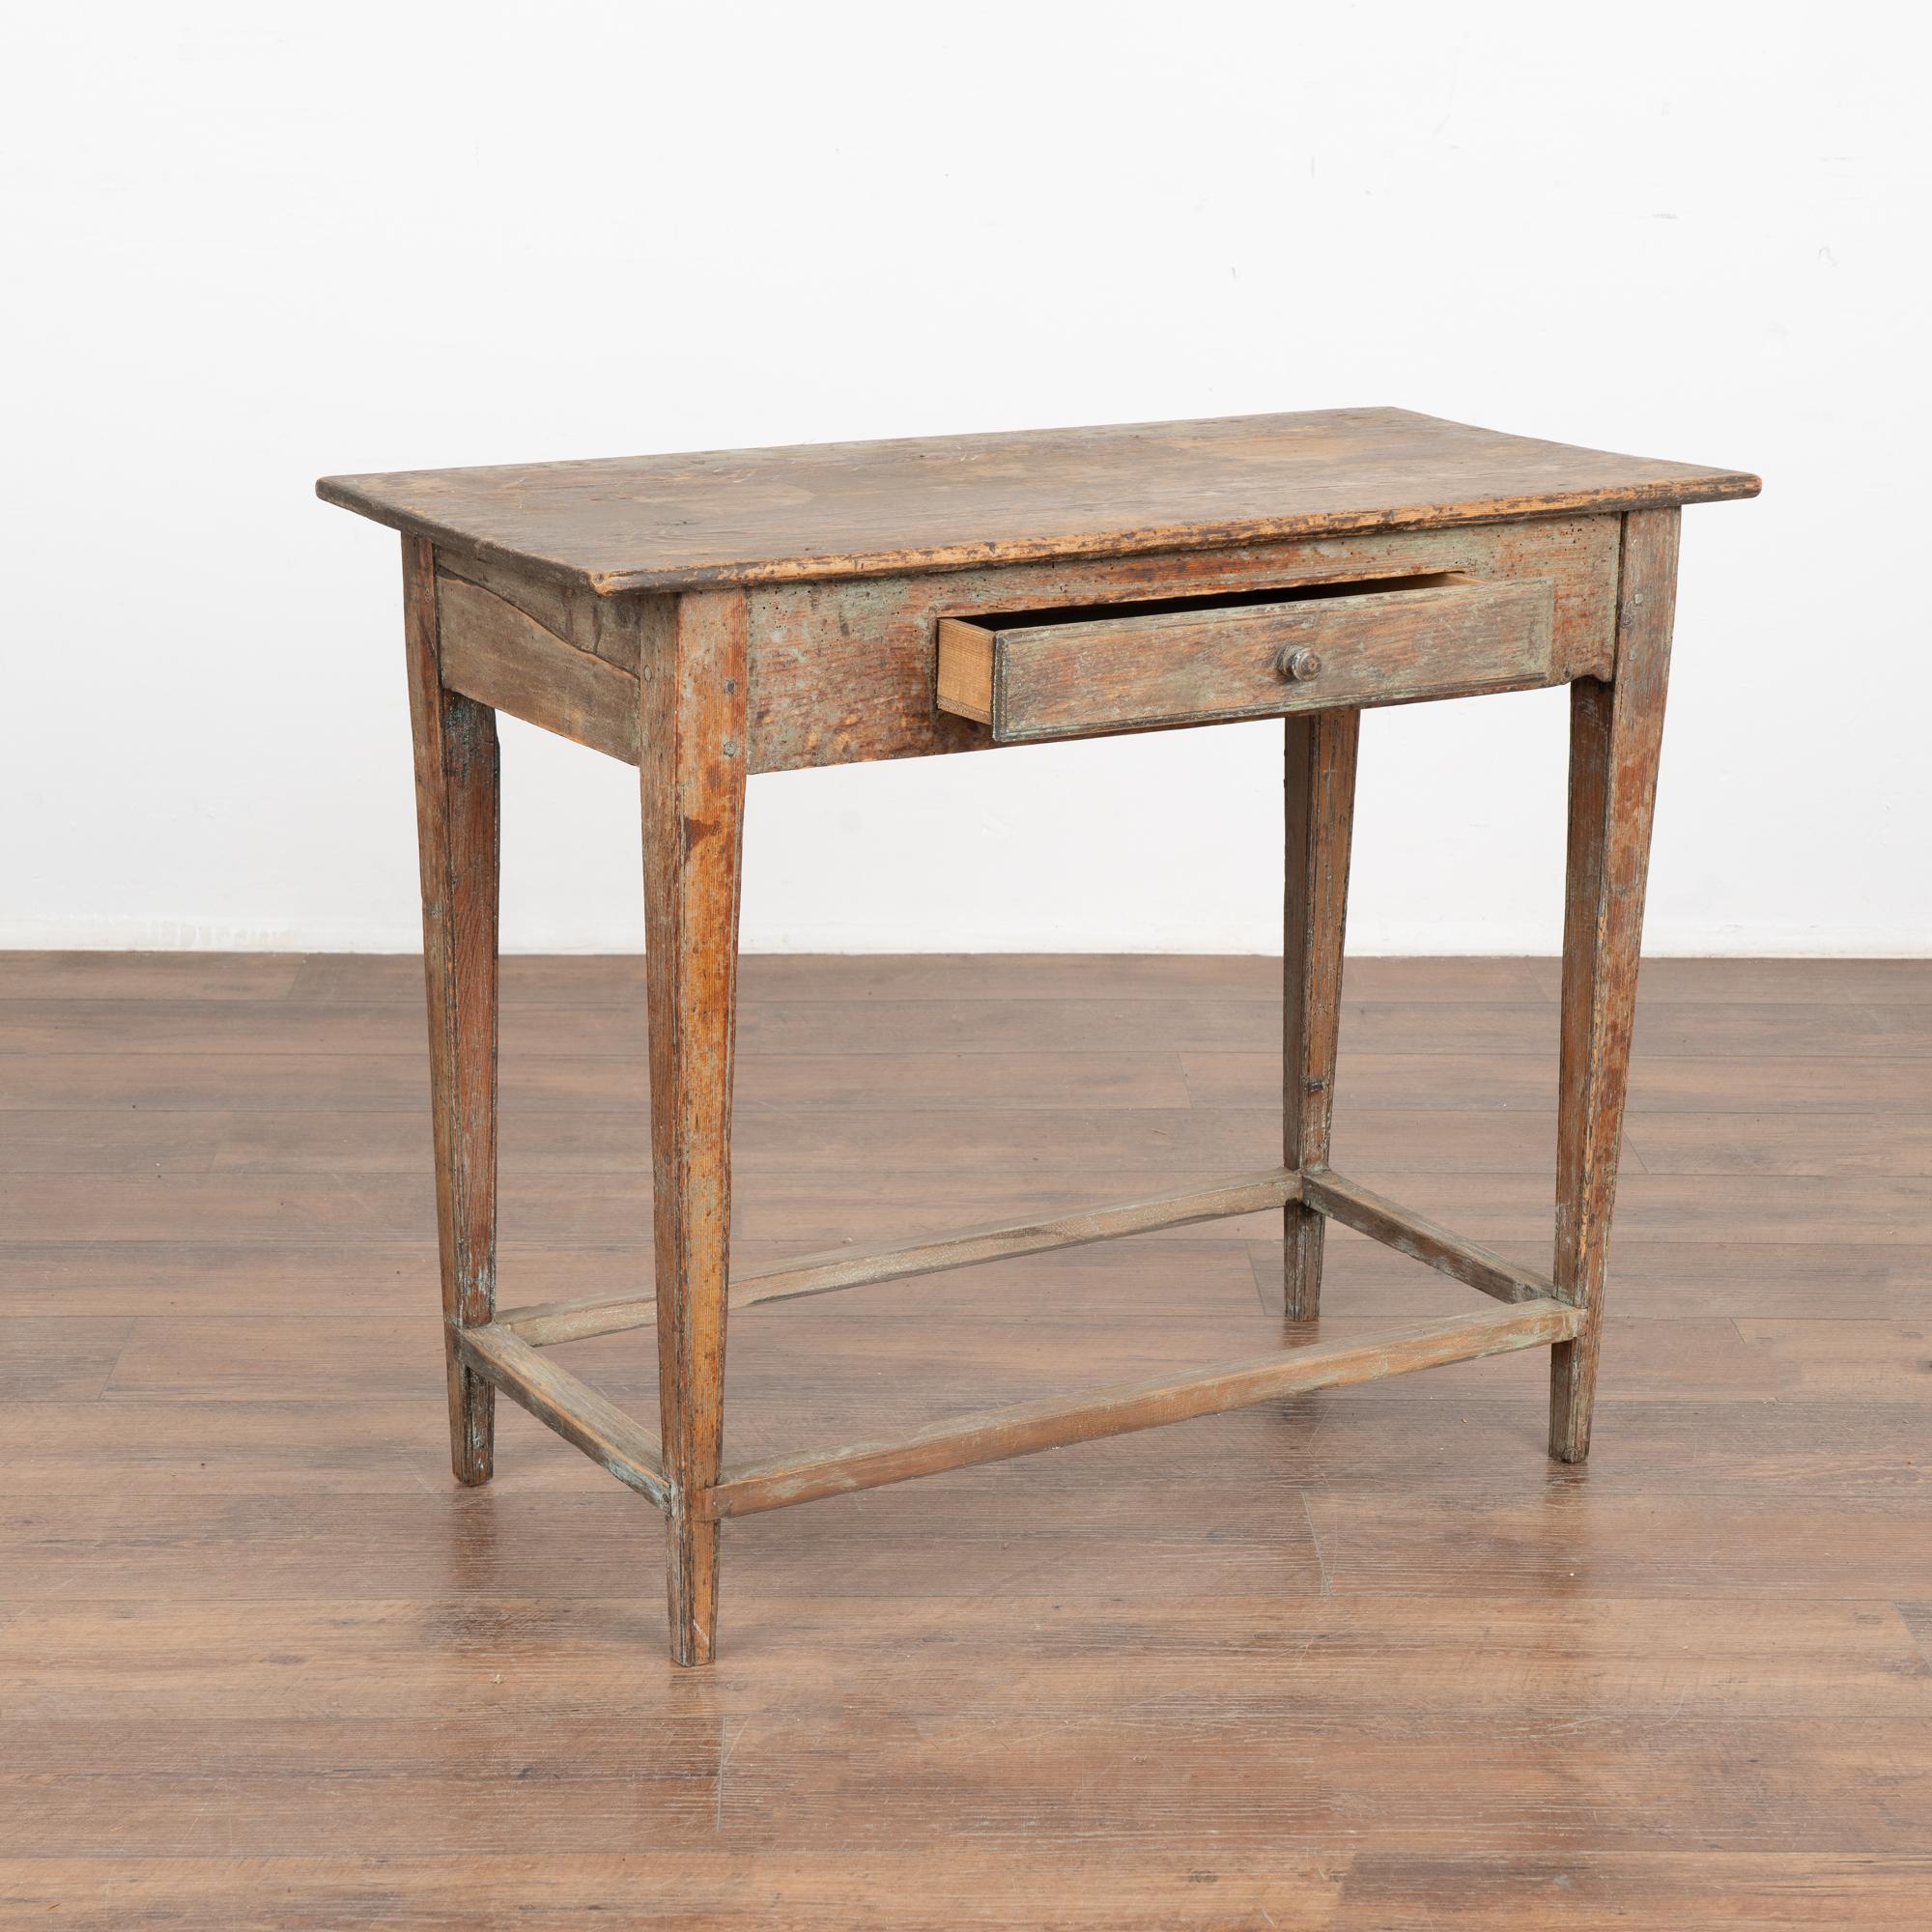 Country Original Painted Pine Side Table With Drawer, Sweden circa 1820-40